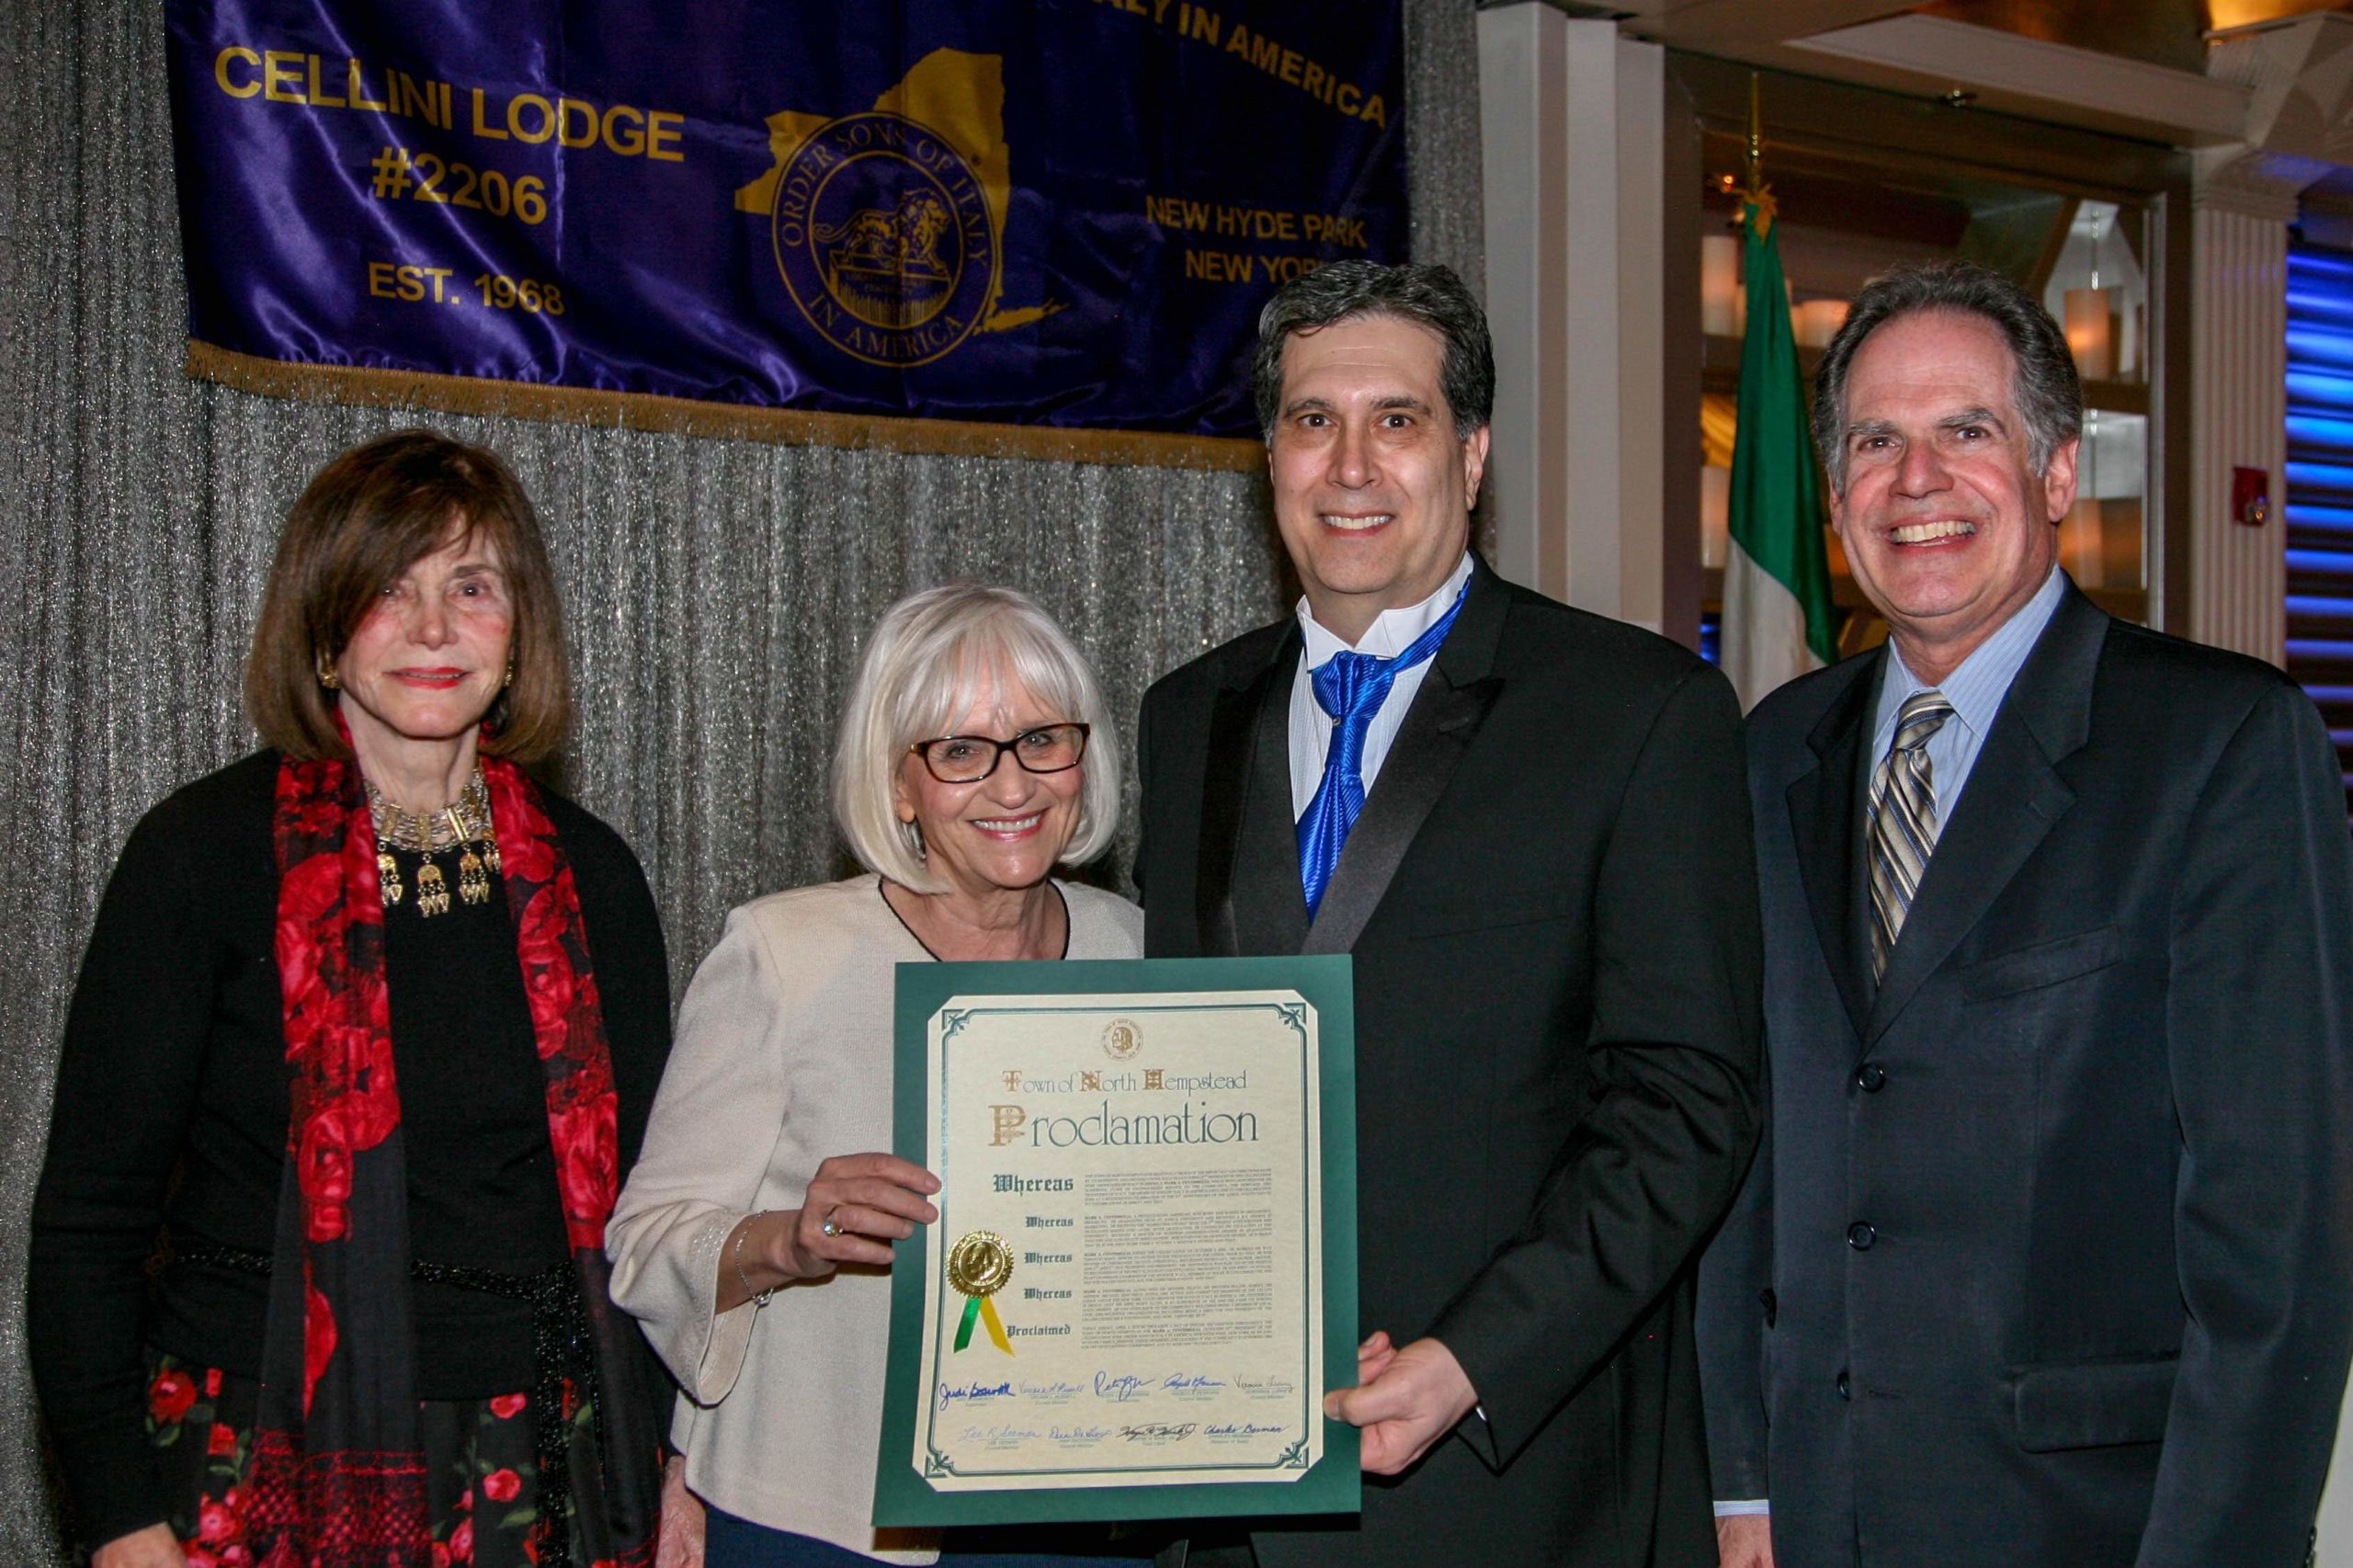 (Left to Right): Council Member Lee Seeman, Supervisor Judi Bosworth, Mark A. Ventimiglia and Receiver of Taxes Charles Berman at the Cellini Lodge #2206’s 51st Anniversary Dinner Dance. (Photo Courtesy of town of North Hempstead)